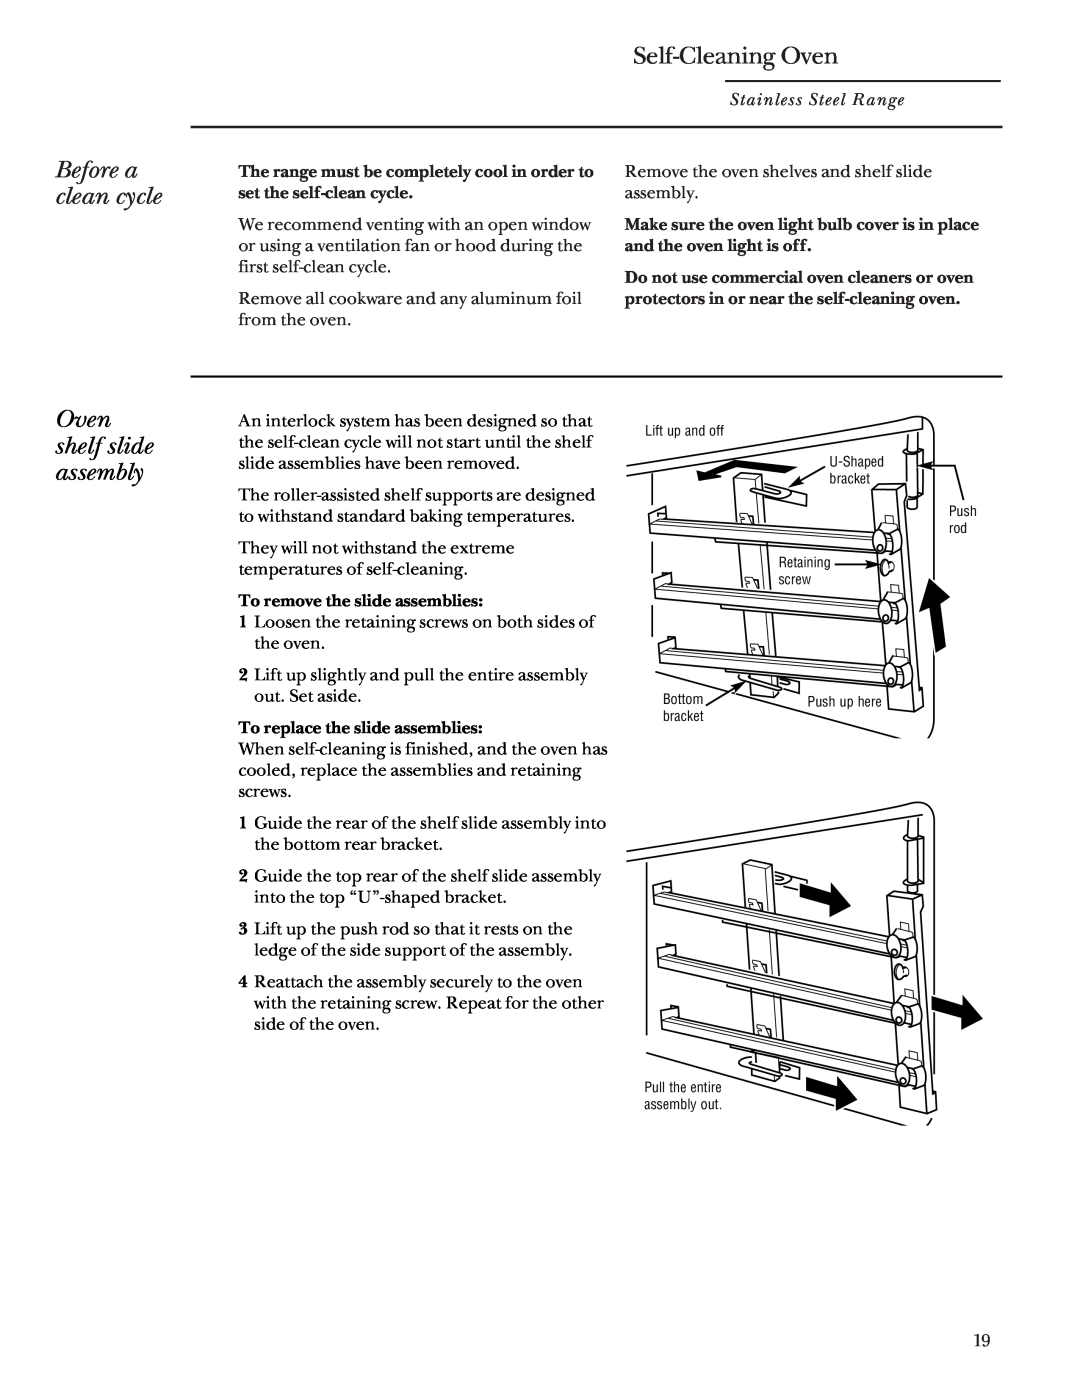 GE Monogram 164D4290P031 owner manual Self-CleaningOven, Oven shelf slide assembly, Before a clean cycle 